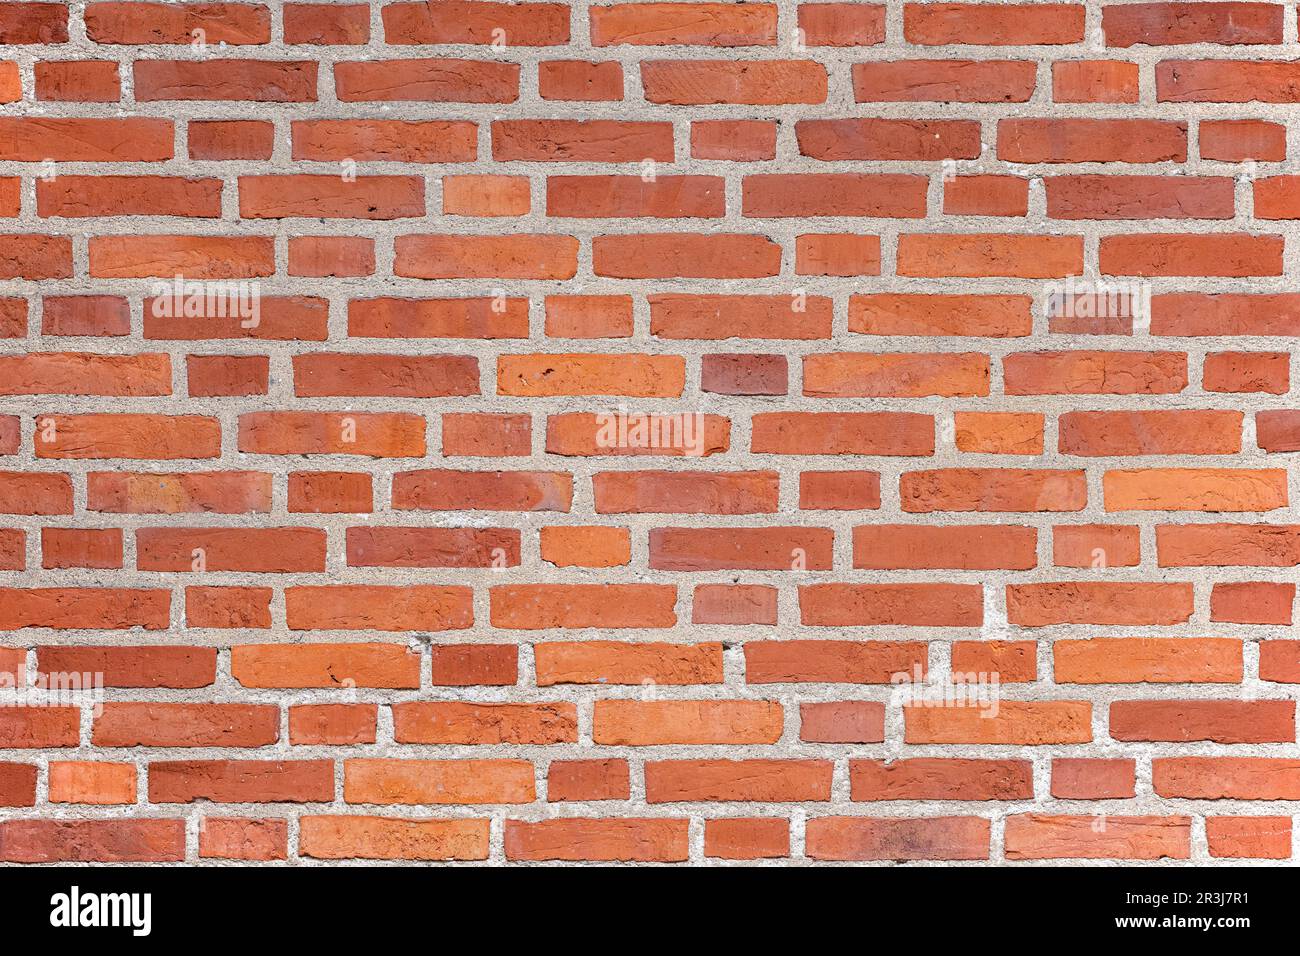 Background from a clean and regular red brick wall Stock Photo